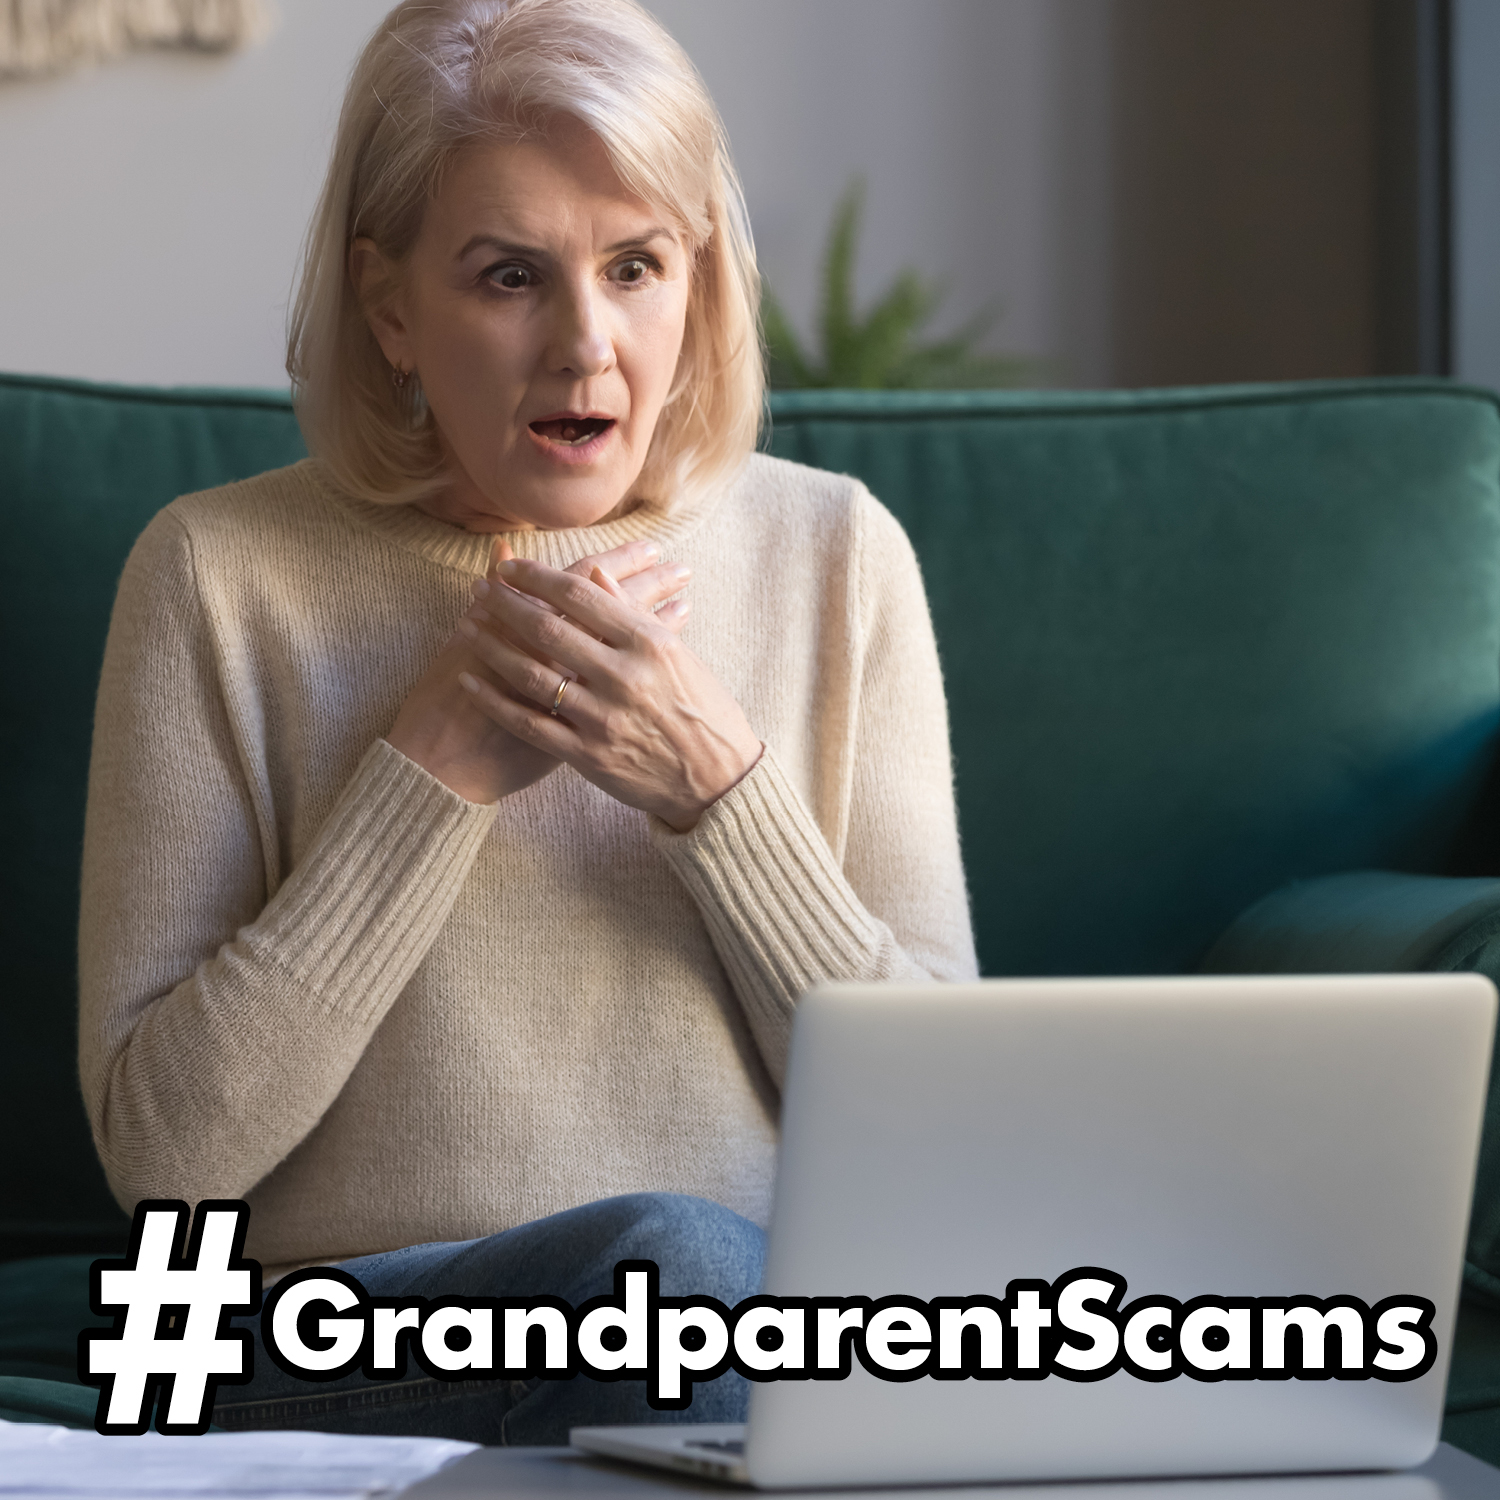 grandmother looking at laptop in shock #GrandparentScams